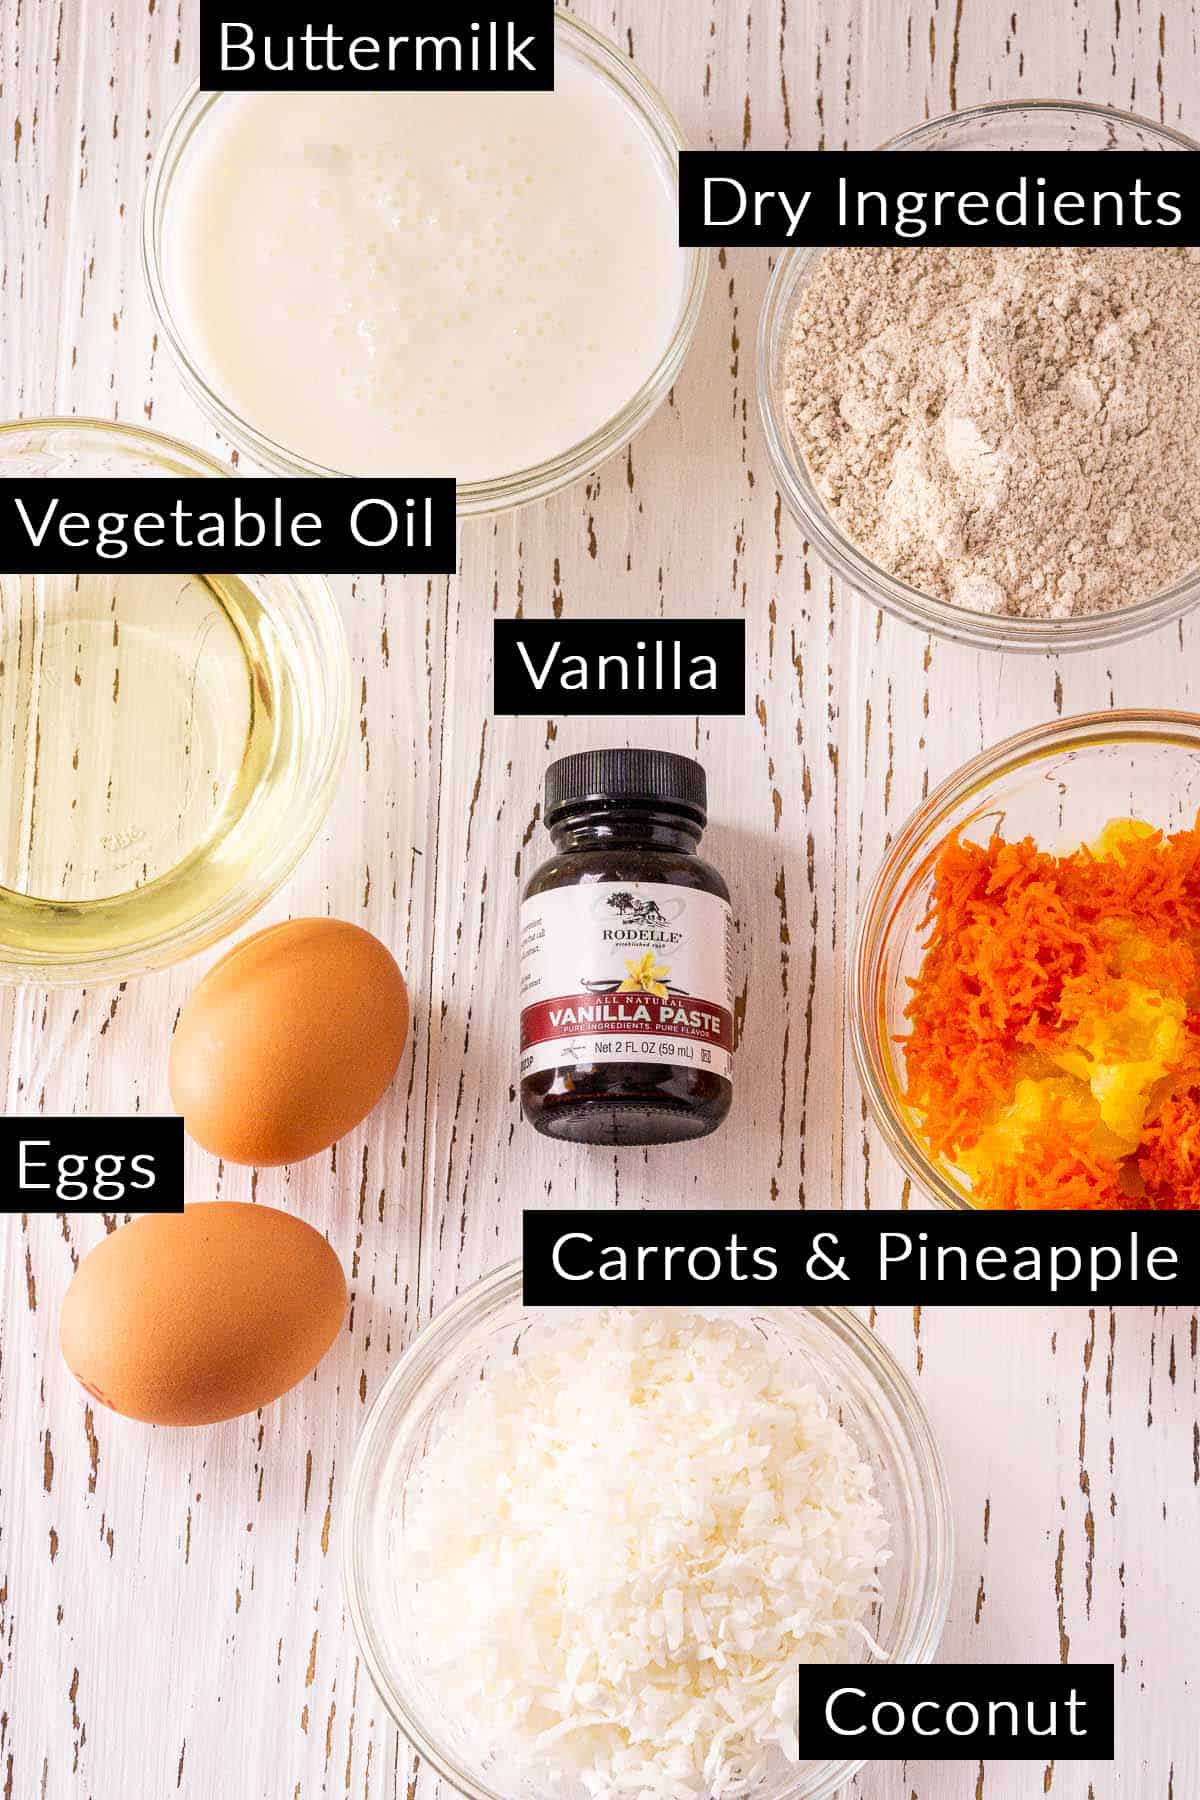 The carrot cake muffin ingredients on a white wooden board with black and white labels.